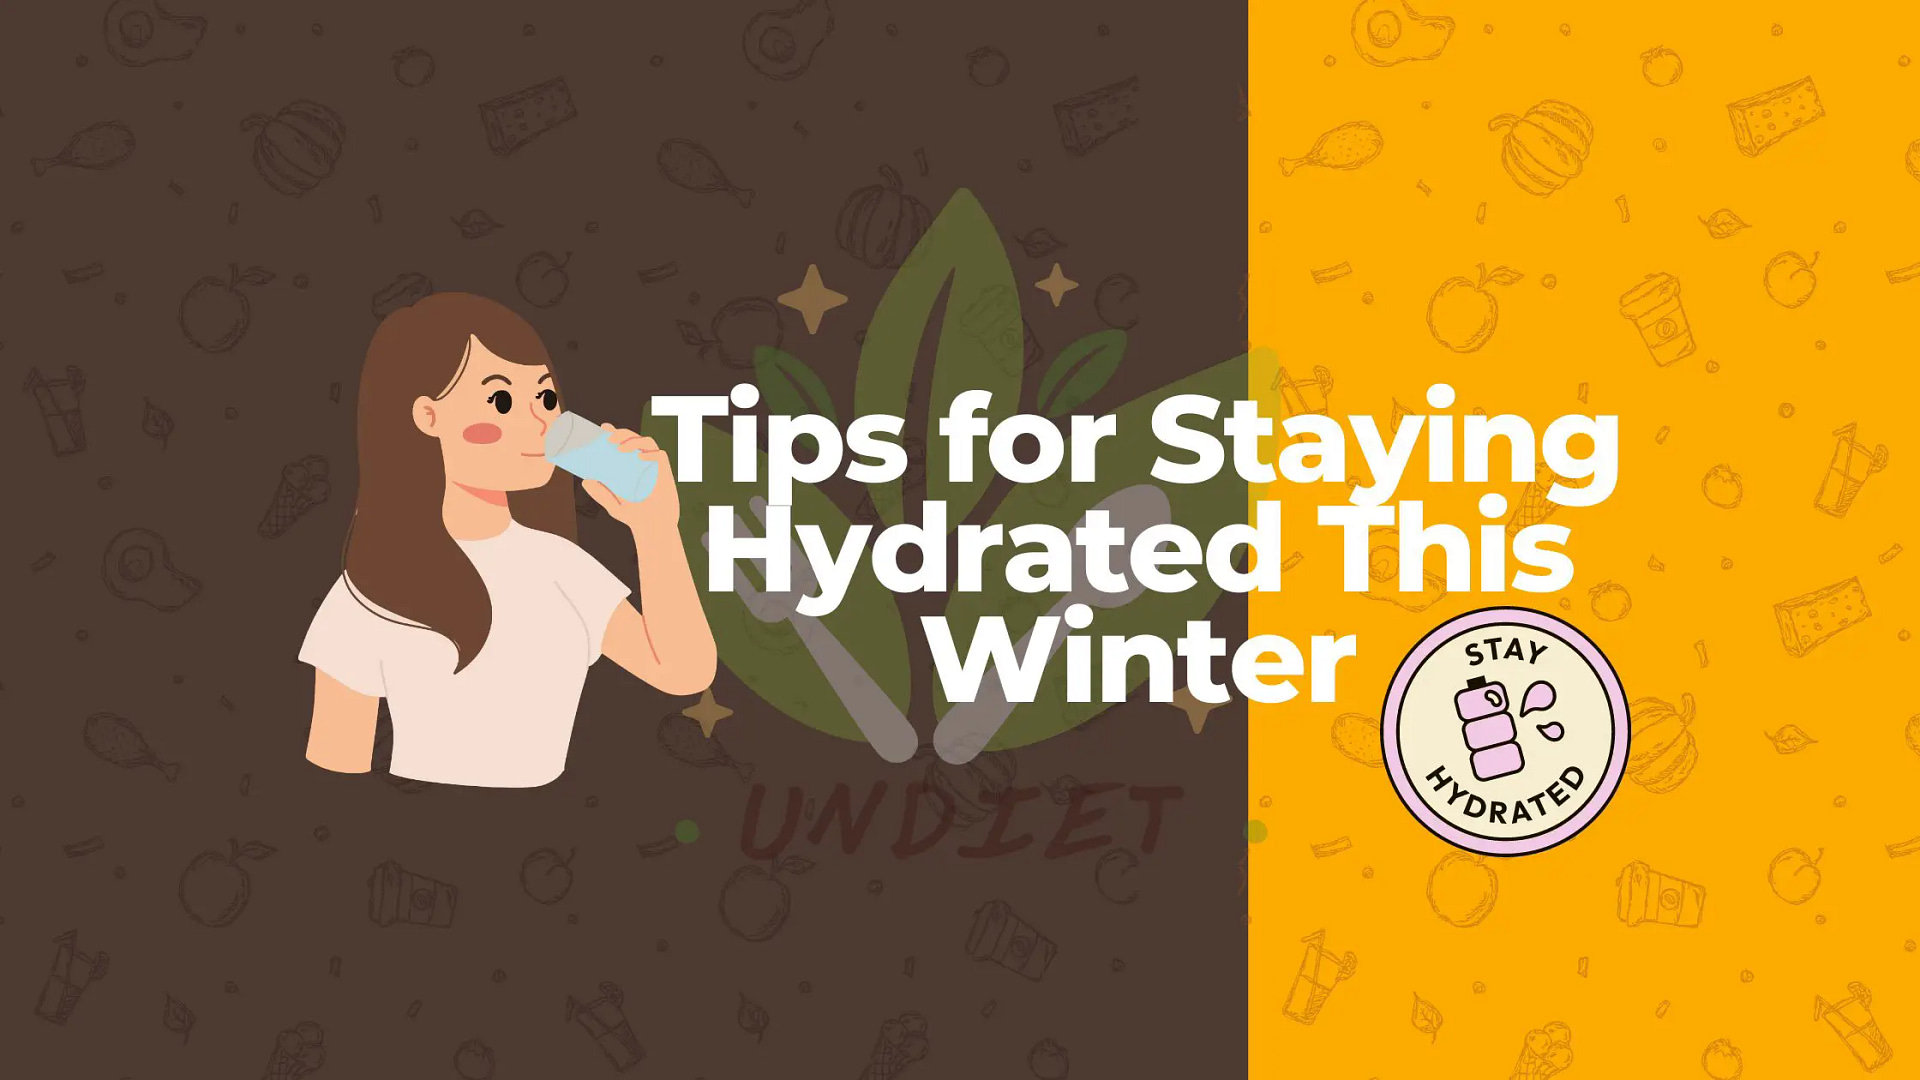 Tips for Staying Hydrated This Winter